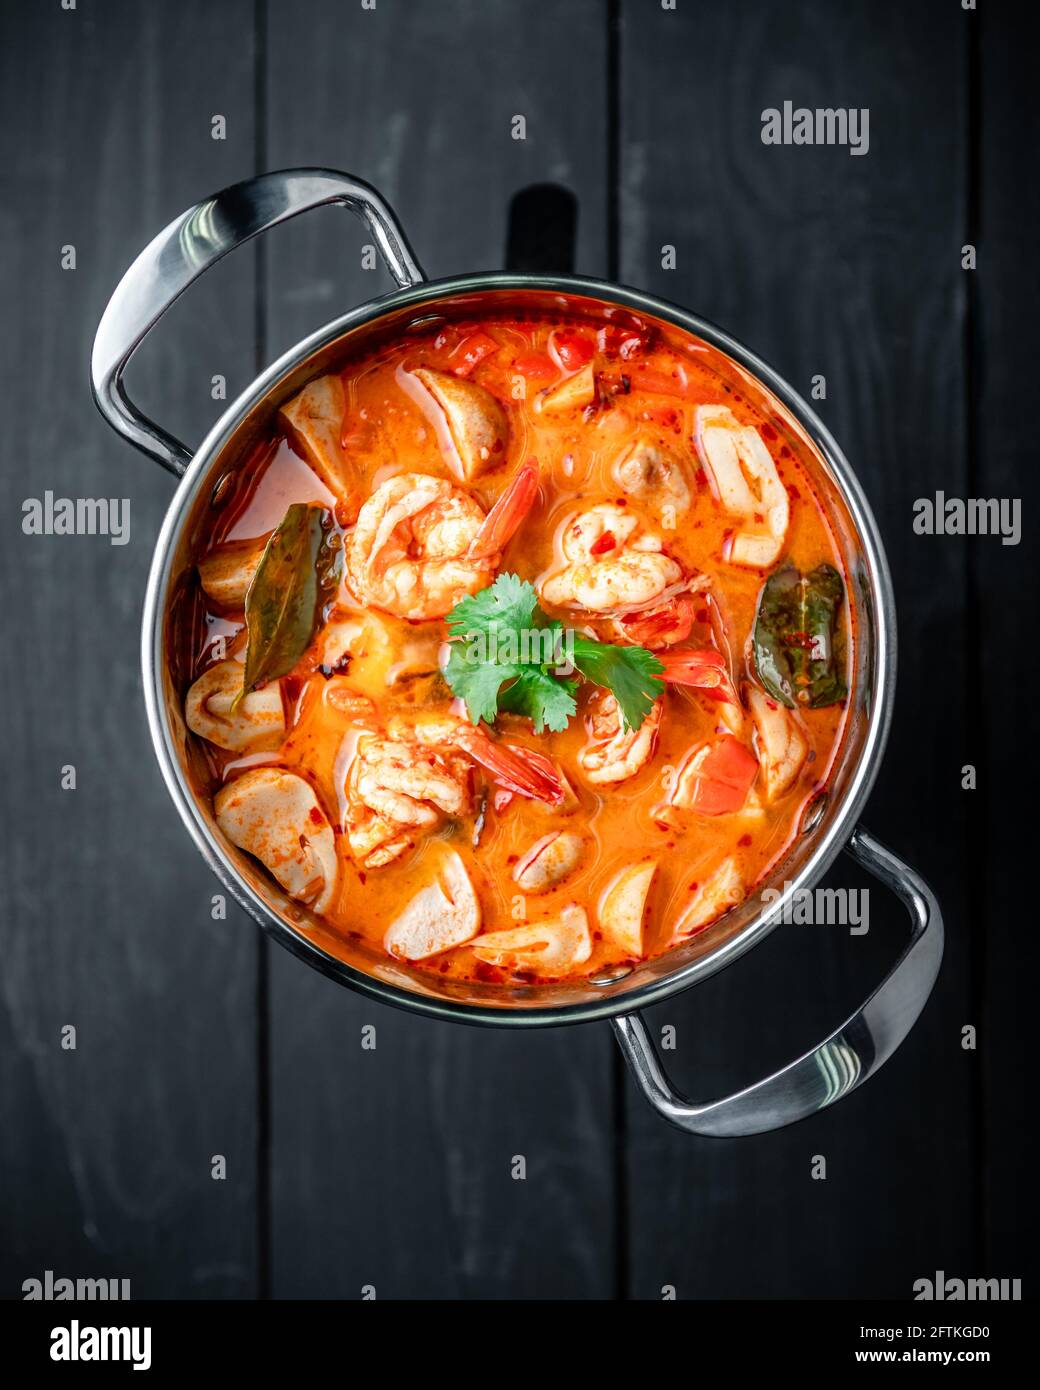 Spicy Thai Tom Yum Goong Soup in Stainless Steel Hot Pot Stock Photo - Alamy